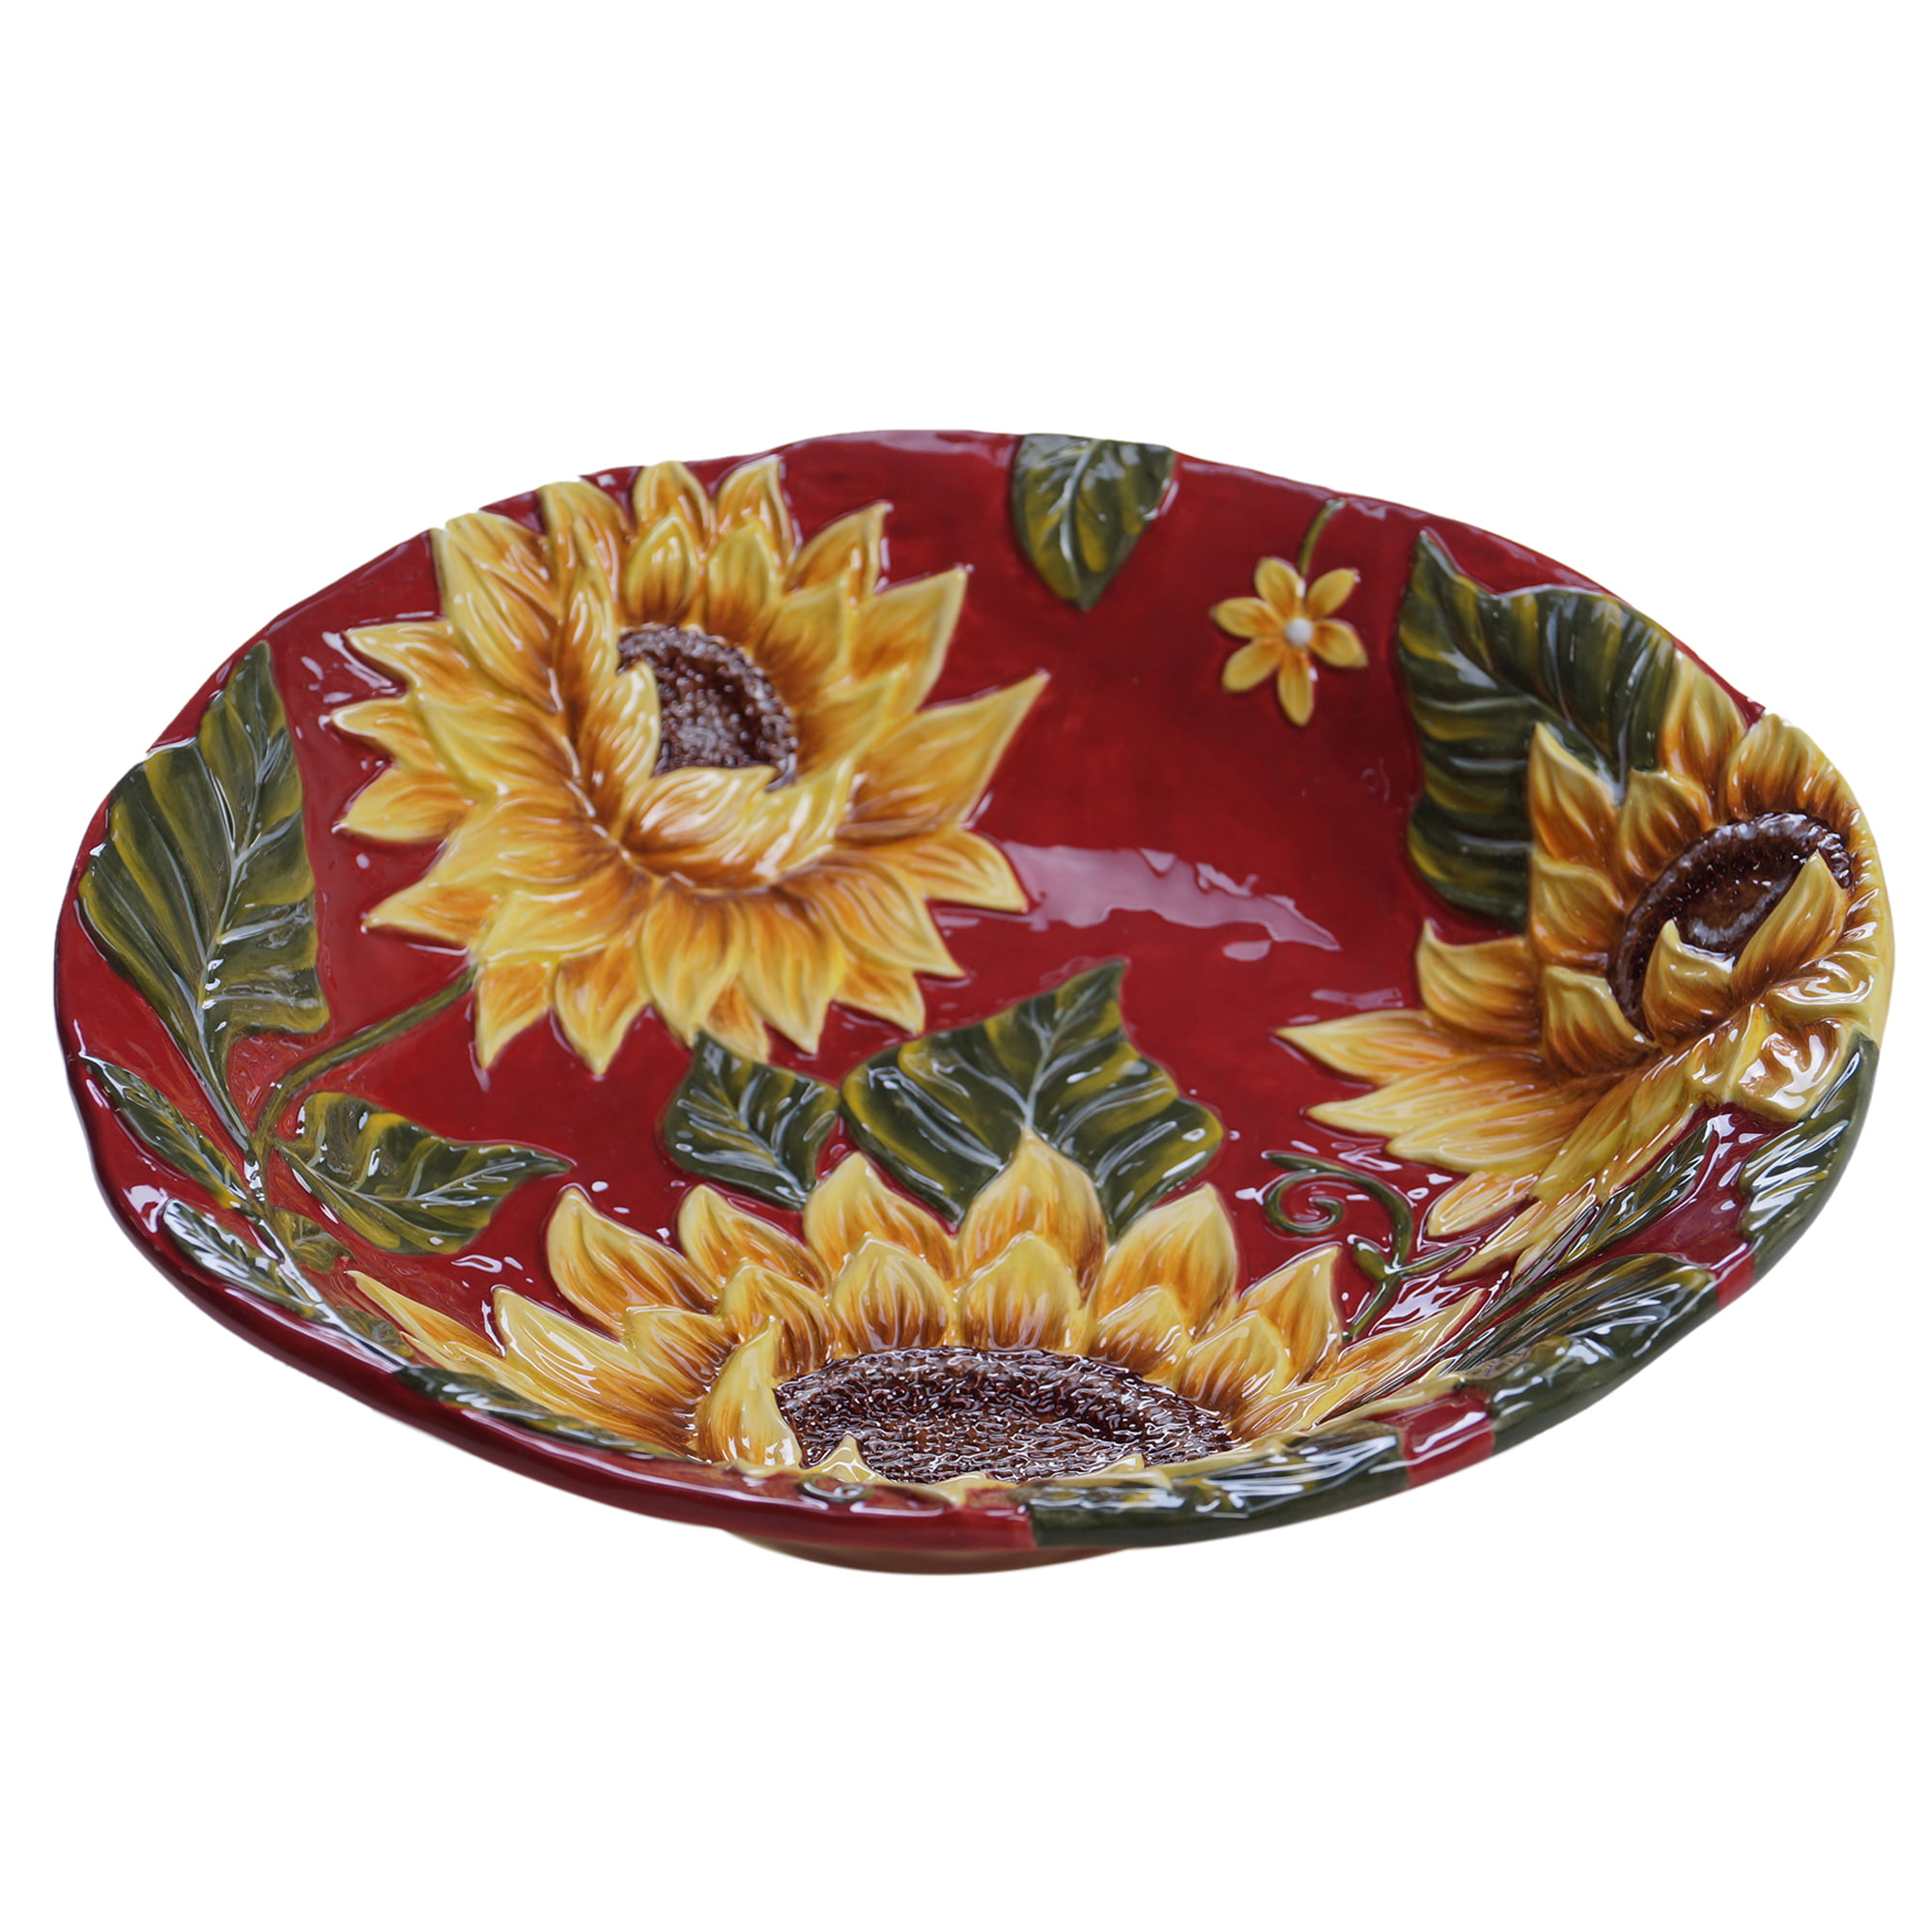 Sunset Sunflower 3-d Dessert Plates Red Yellow Floral Traditional Round Ceramic 4 Piece Set of 4 